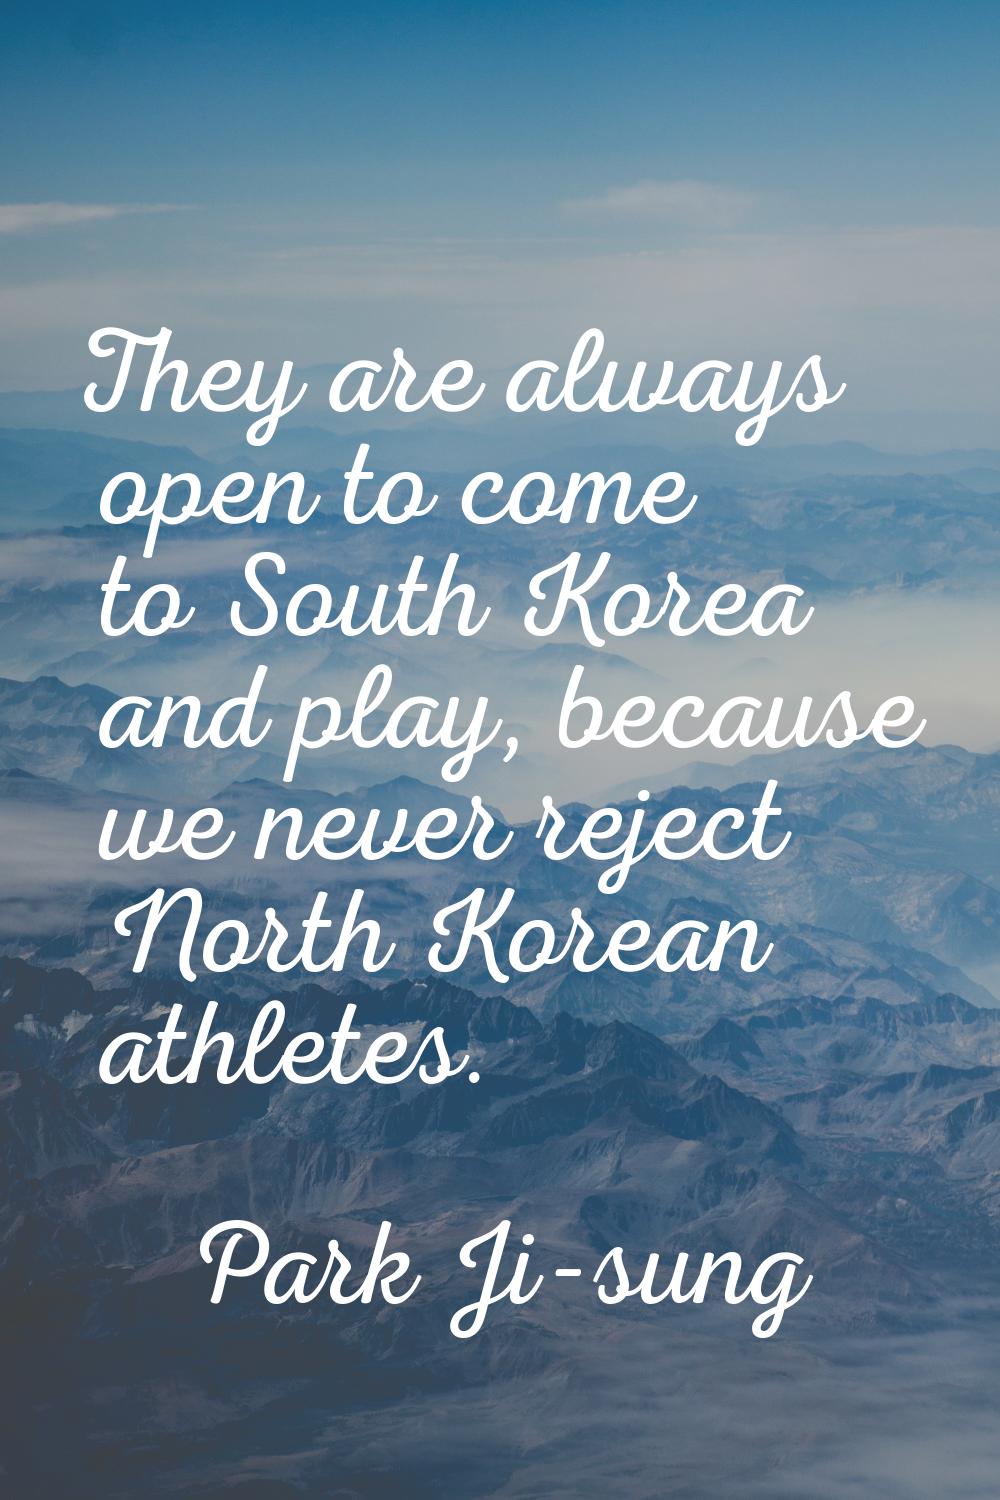 They are always open to come to South Korea and play, because we never reject North Korean athletes